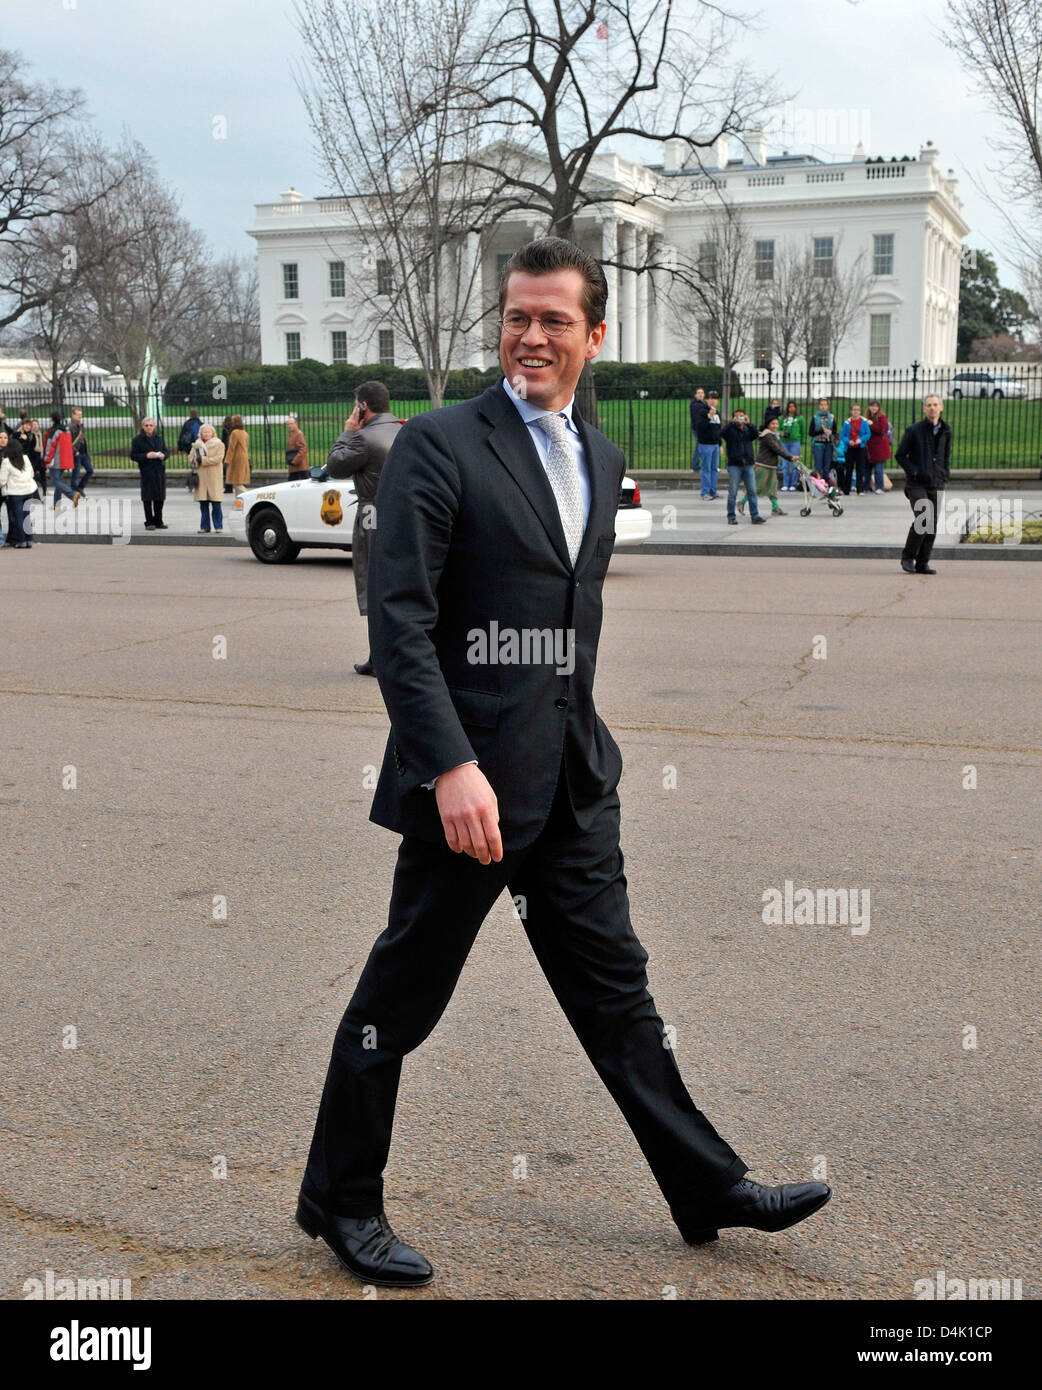 German Minister of Economy, Karl-Theodor zu Guttenberg, walks past the White House before meeting with Larry Summers, Director of the White House?s National Economic Council for President Barack Obama, in Washington D.C., USA, 17 March 2009. Zu Guttenberg is on a three-day visit to the US, where he will also meet with the management of automaker General Motors (GM), in order to fin Stock Photo